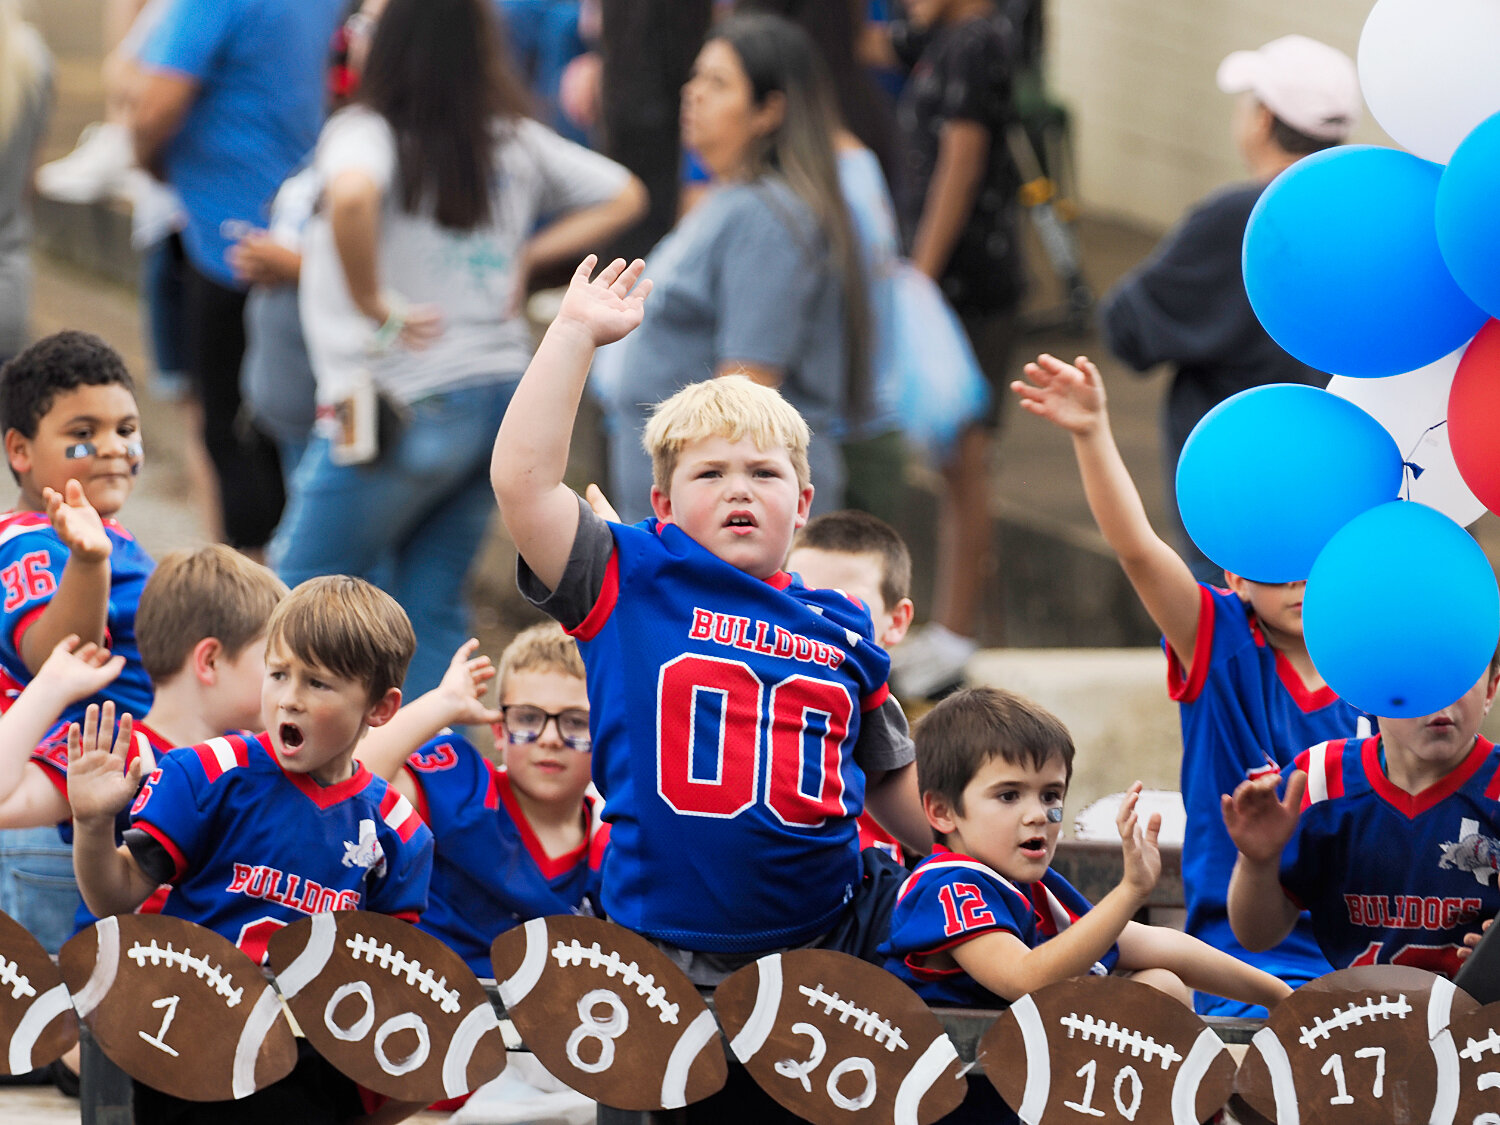 Football players of all ages got to take part in the procession westward up Goode St. [see more sights & buy Bulldogs prints]